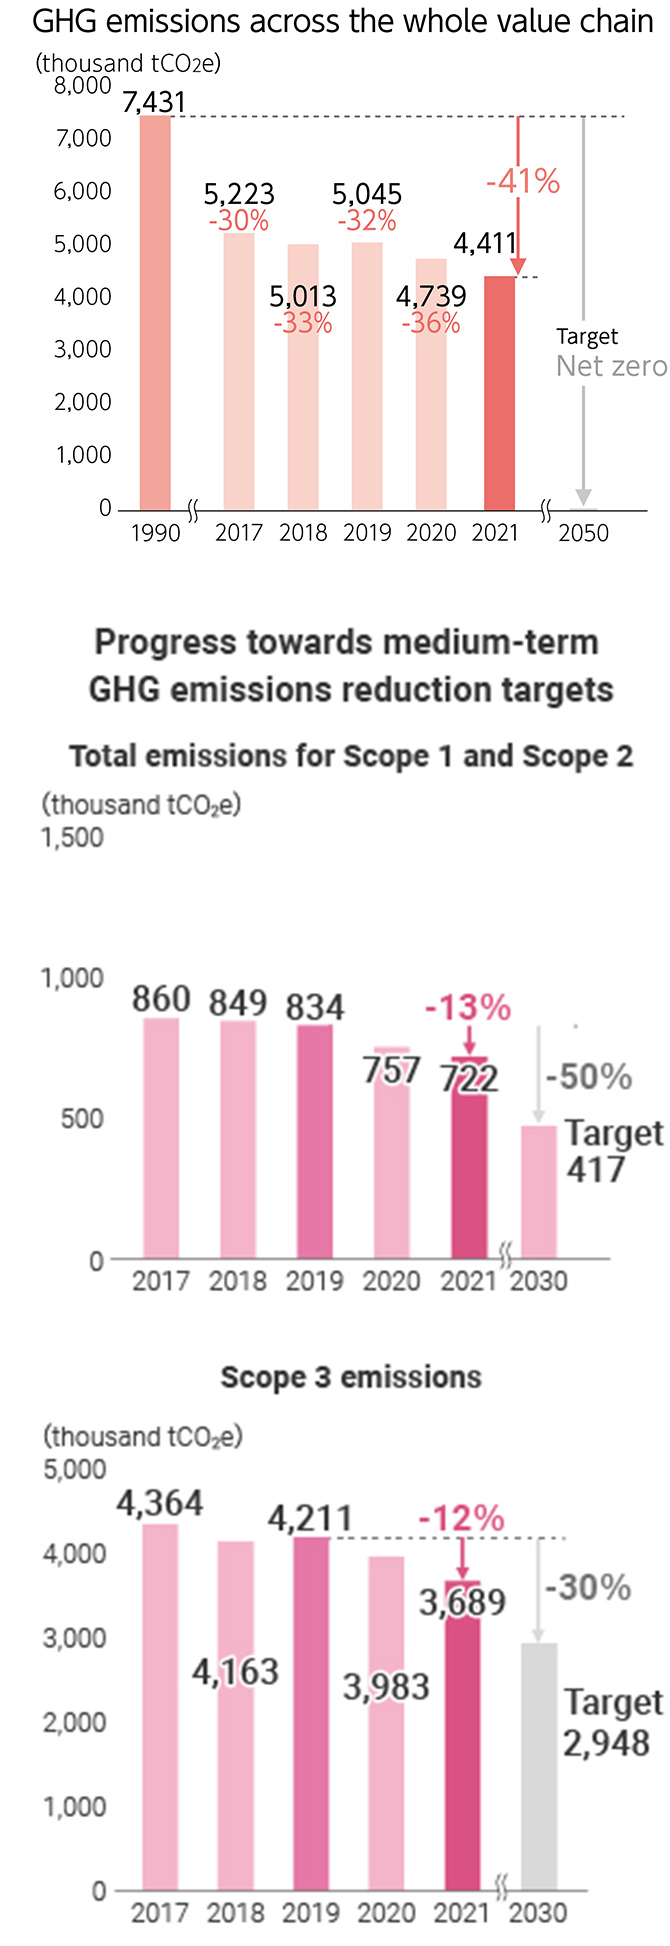 Figure: GHG emissions across the whole value chain, Progress towards medium-term GHG emissions reduction targets TotaI emissions for Scope 1 and Scope 2, Scope 3 emissions